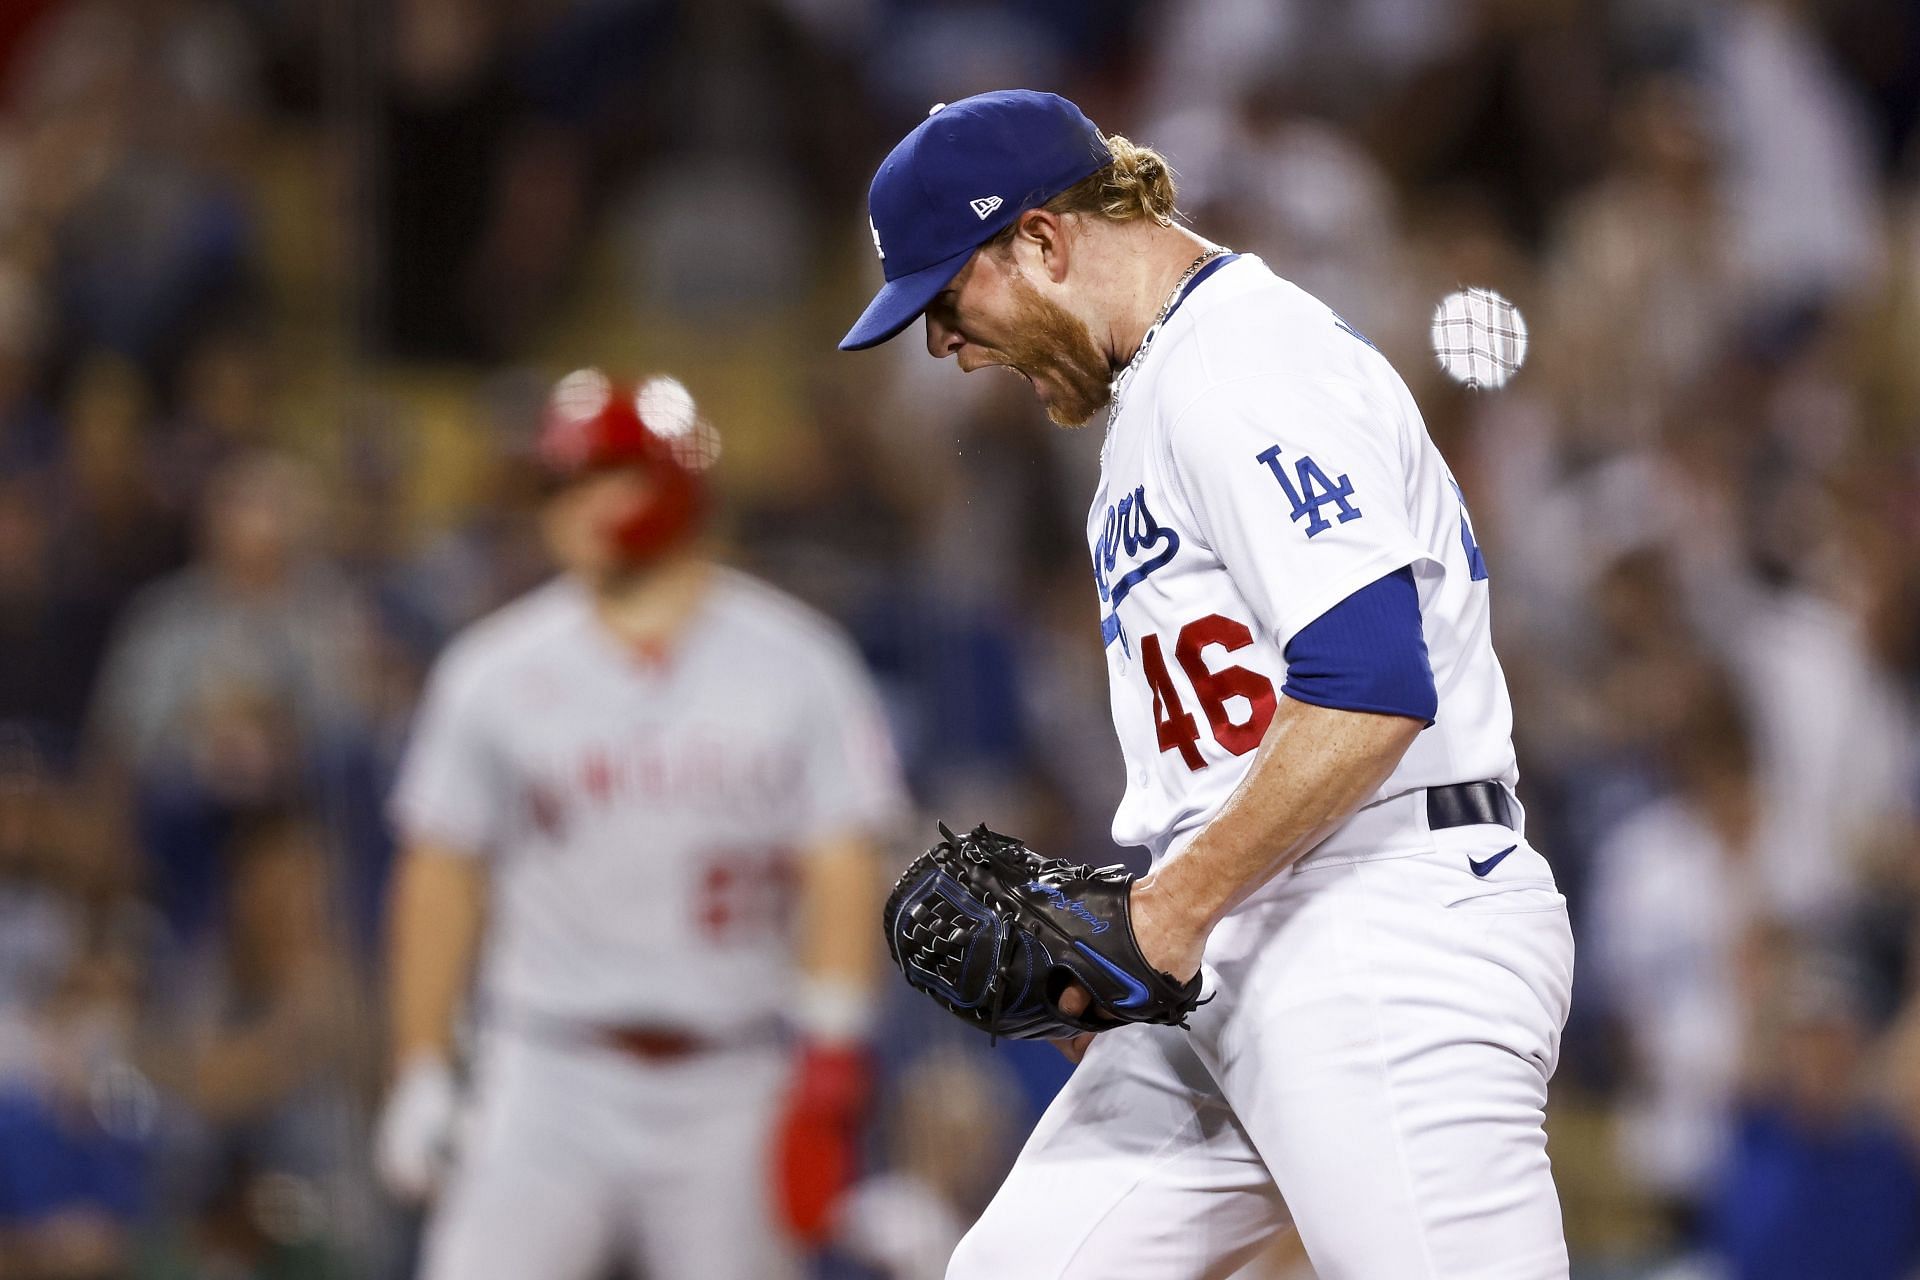 Los Angeles Dodgers closer Craig Kimbrel closes out the Los Angeles Angels in a drama-filled game.